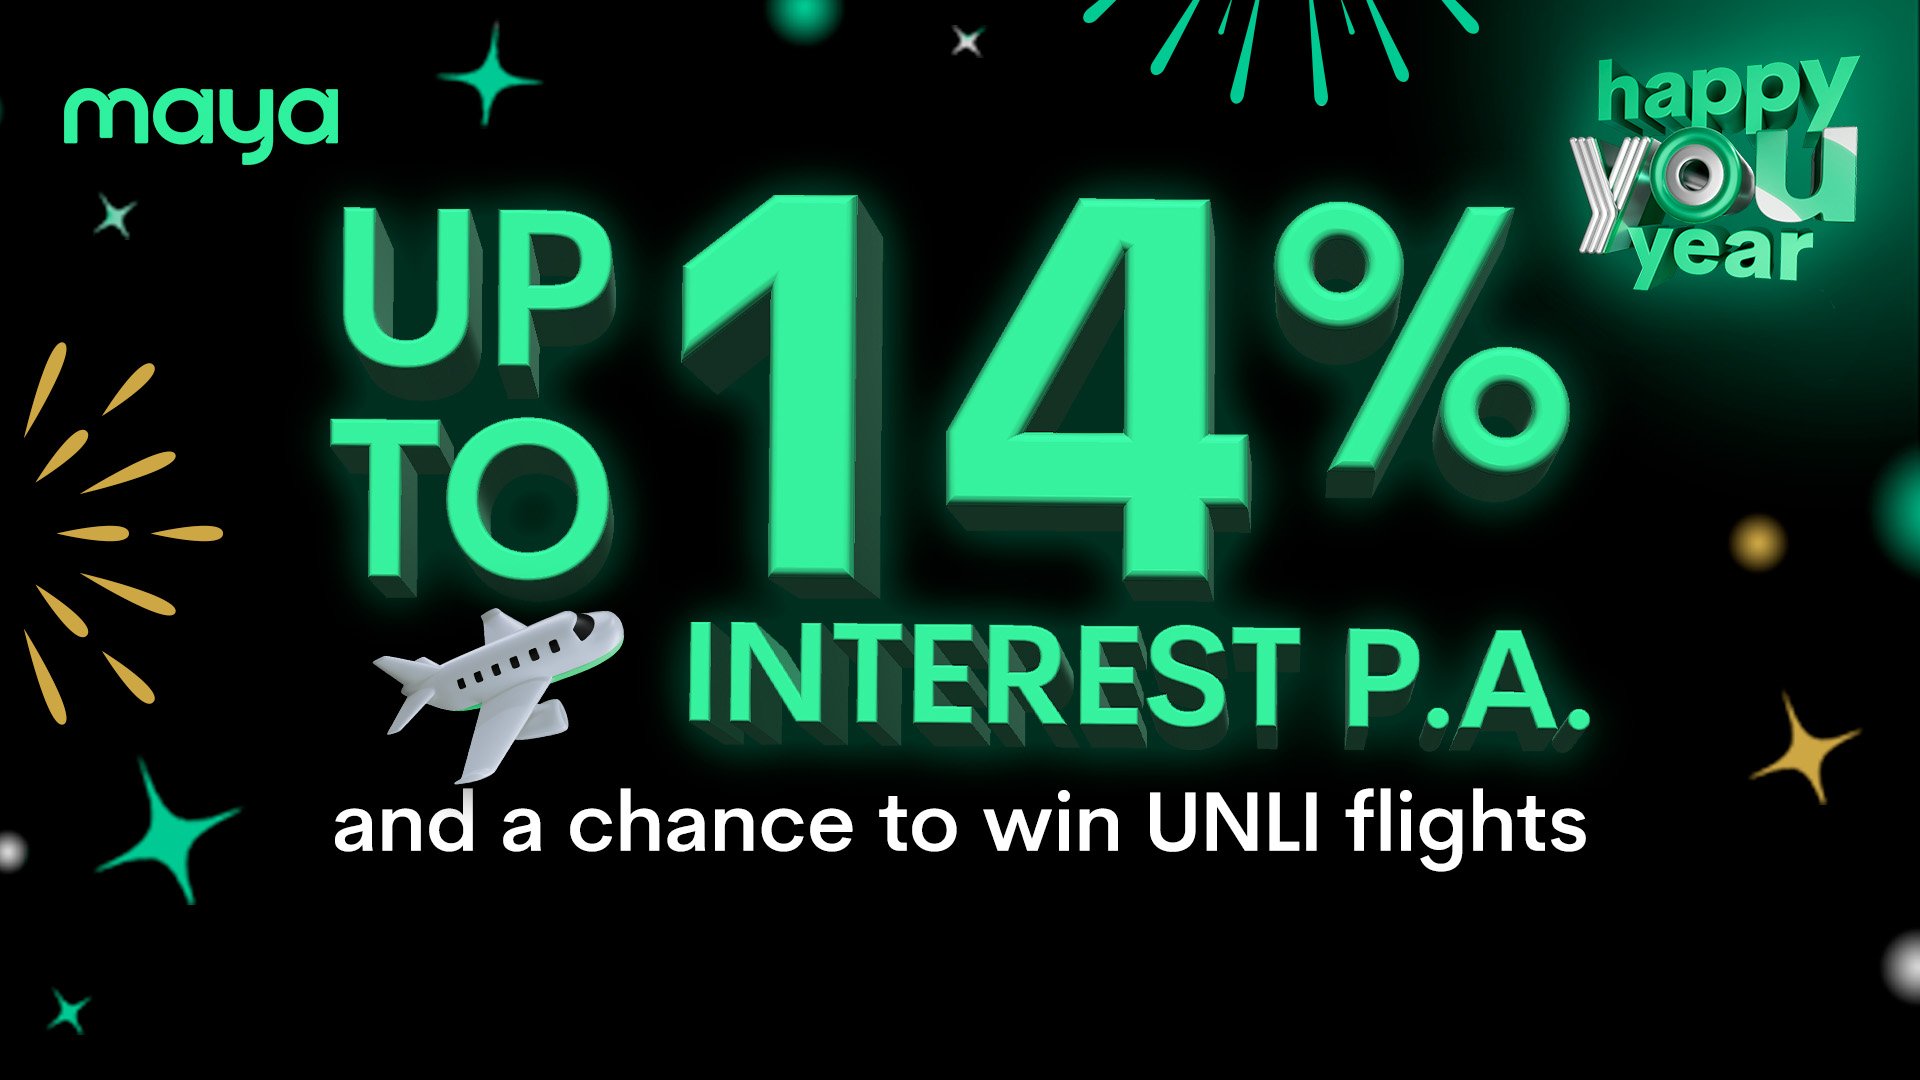 Boost your interest up to 14% p.a. when you pay with Maya